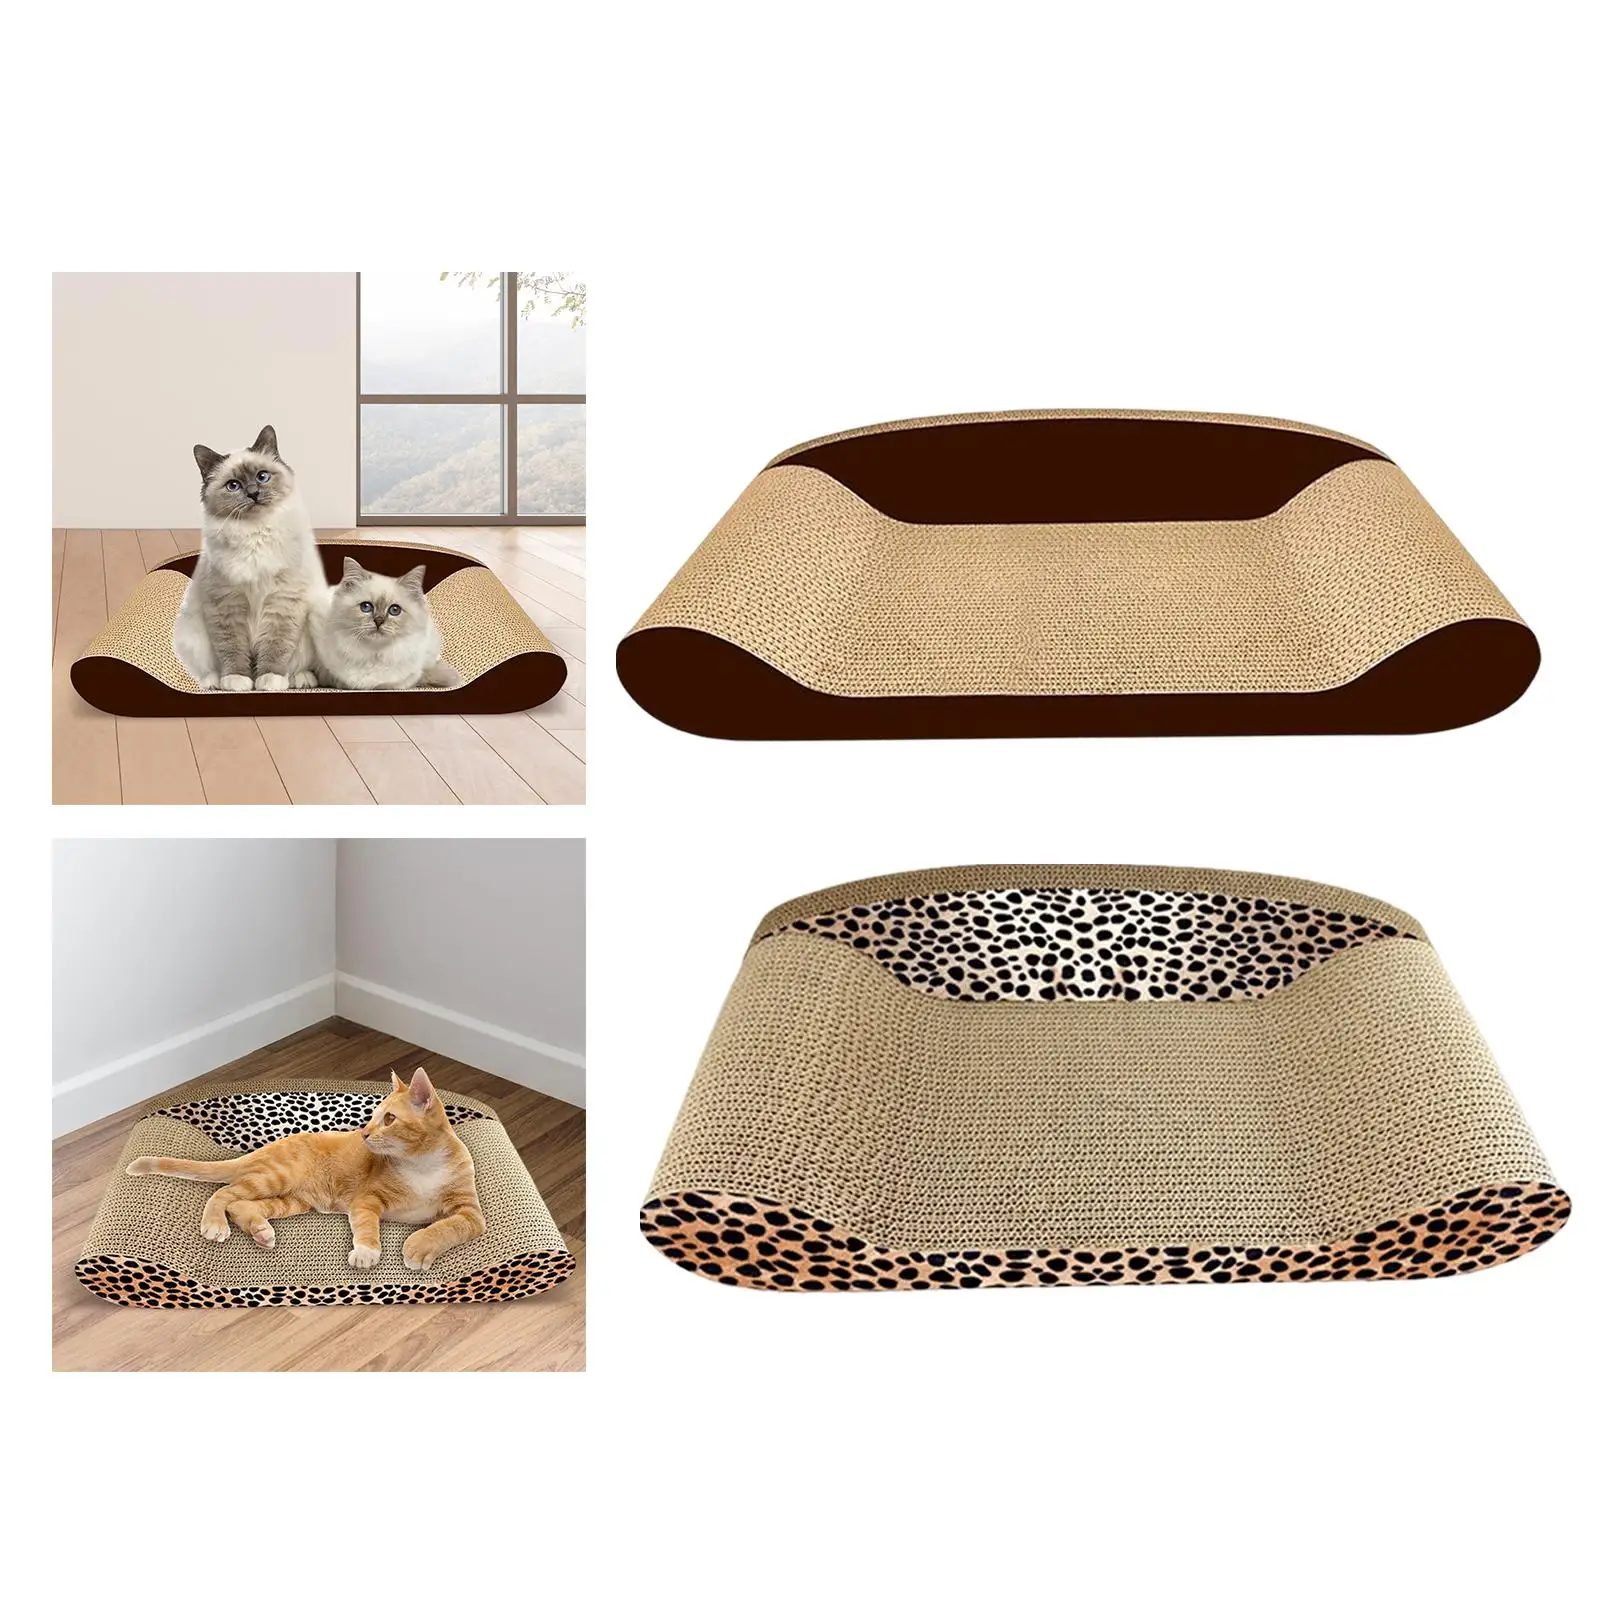 Cat Scratcher Sofa Scratching Board Bed Grind Claws for Kitten Pet Accessories